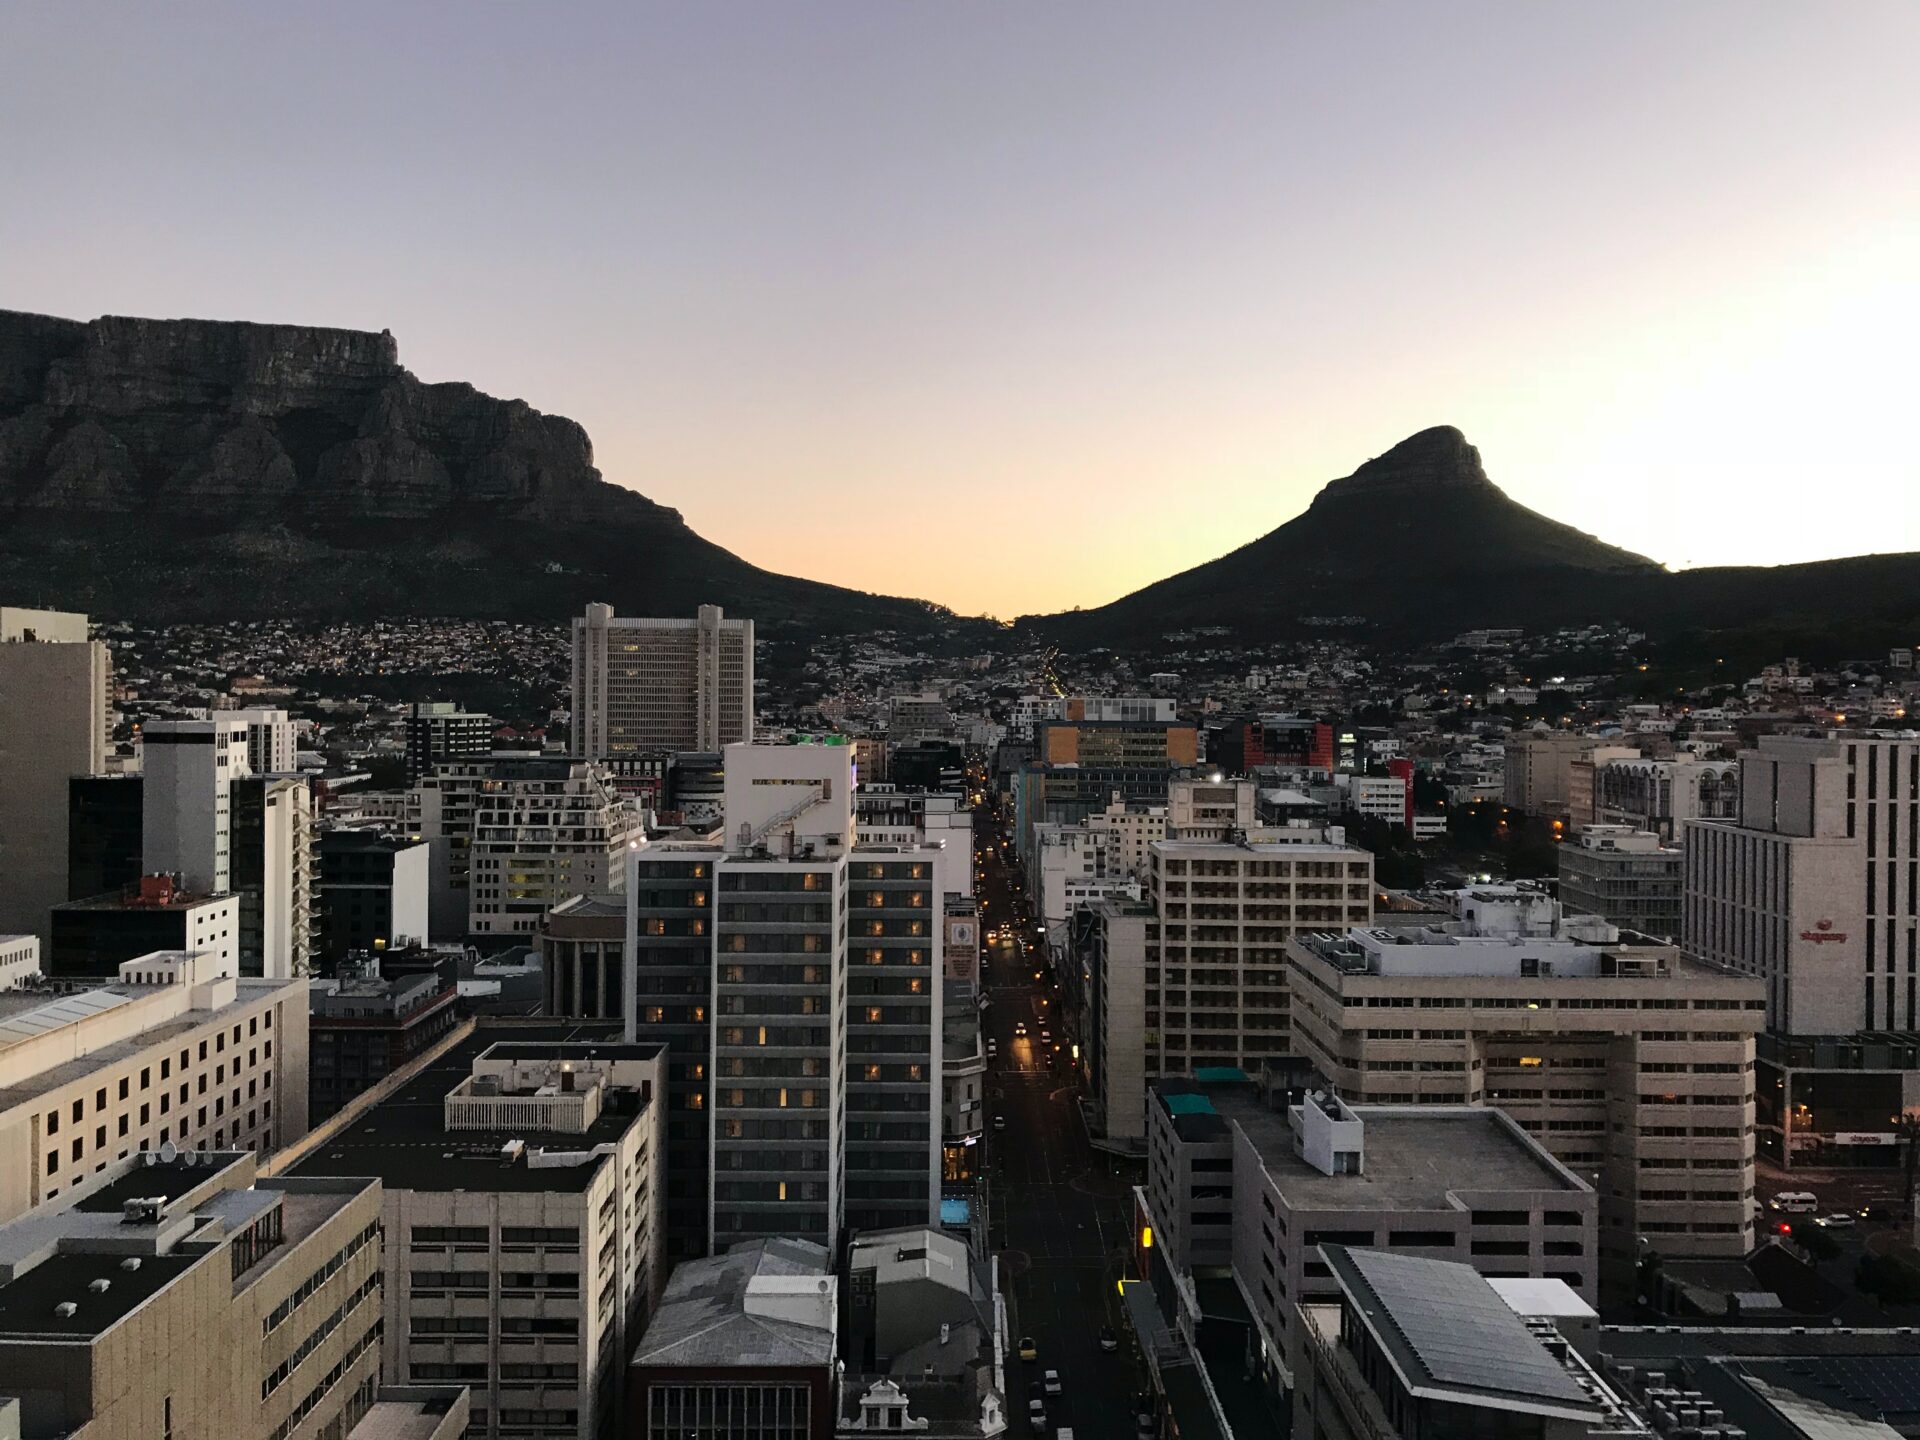 High rise buildings in Cape Town with mountains in the background